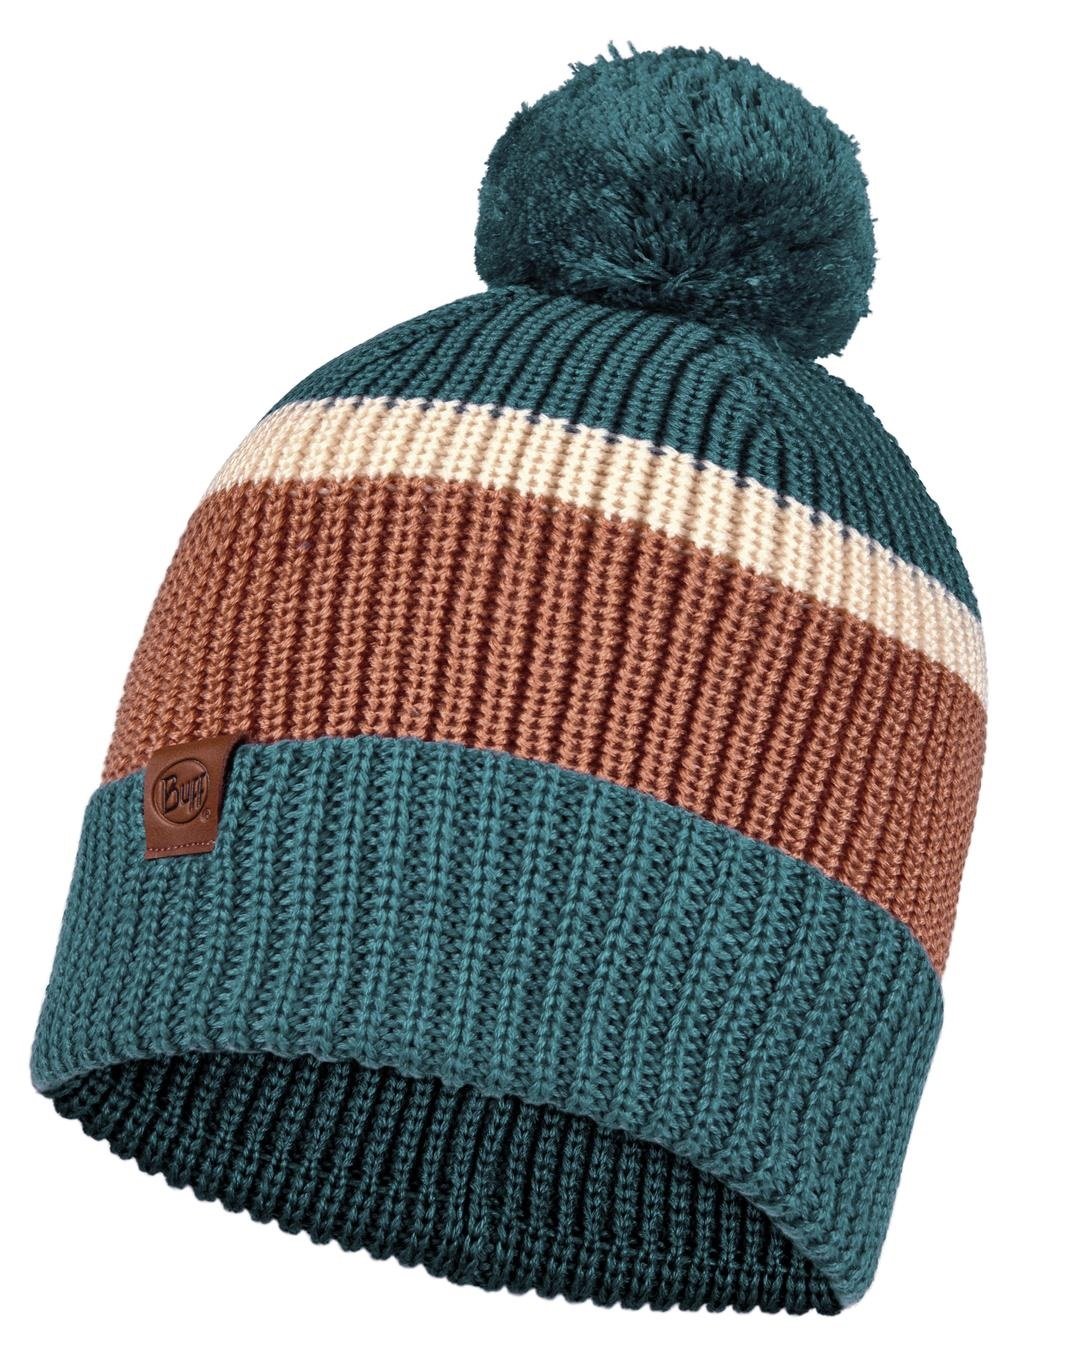 Шапка Buff Knitted Hat Elon Dusty Blue, US:One size, 126464.742.10.00 шапка buff knitted hat elon ash us one size 126464 914 10 00